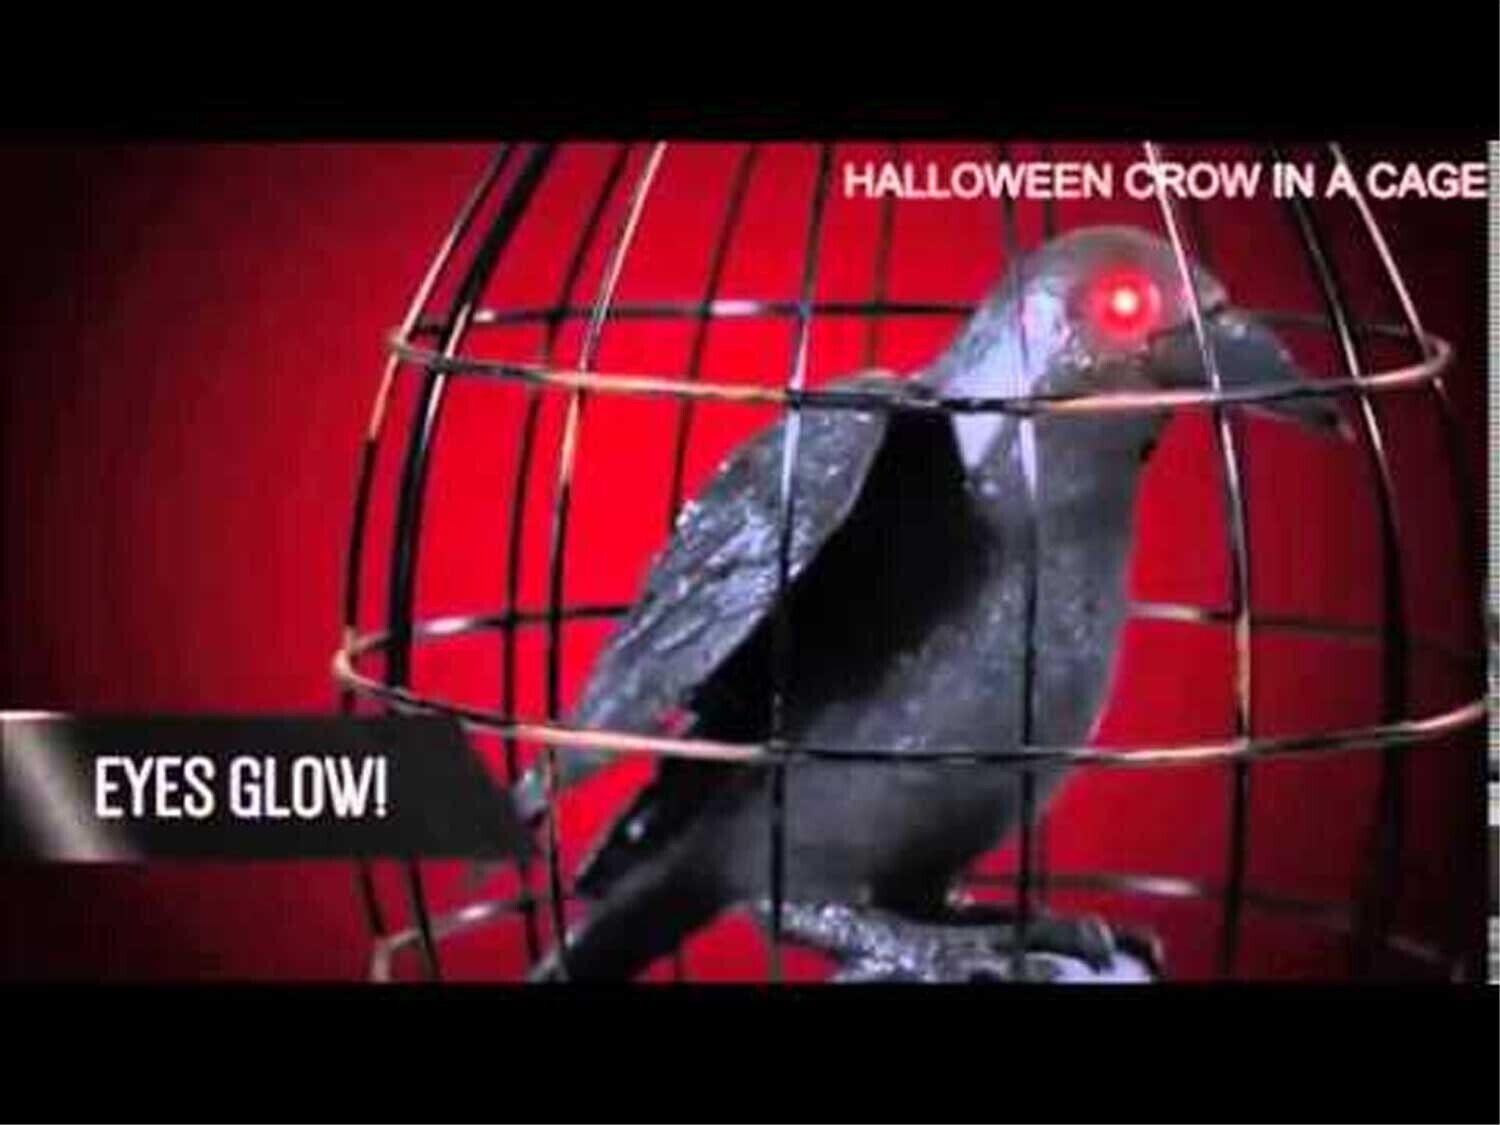 Life Size ANIMATED CROW RAVEN BIRD CAGE Halloween Haunted House Prop Decoration